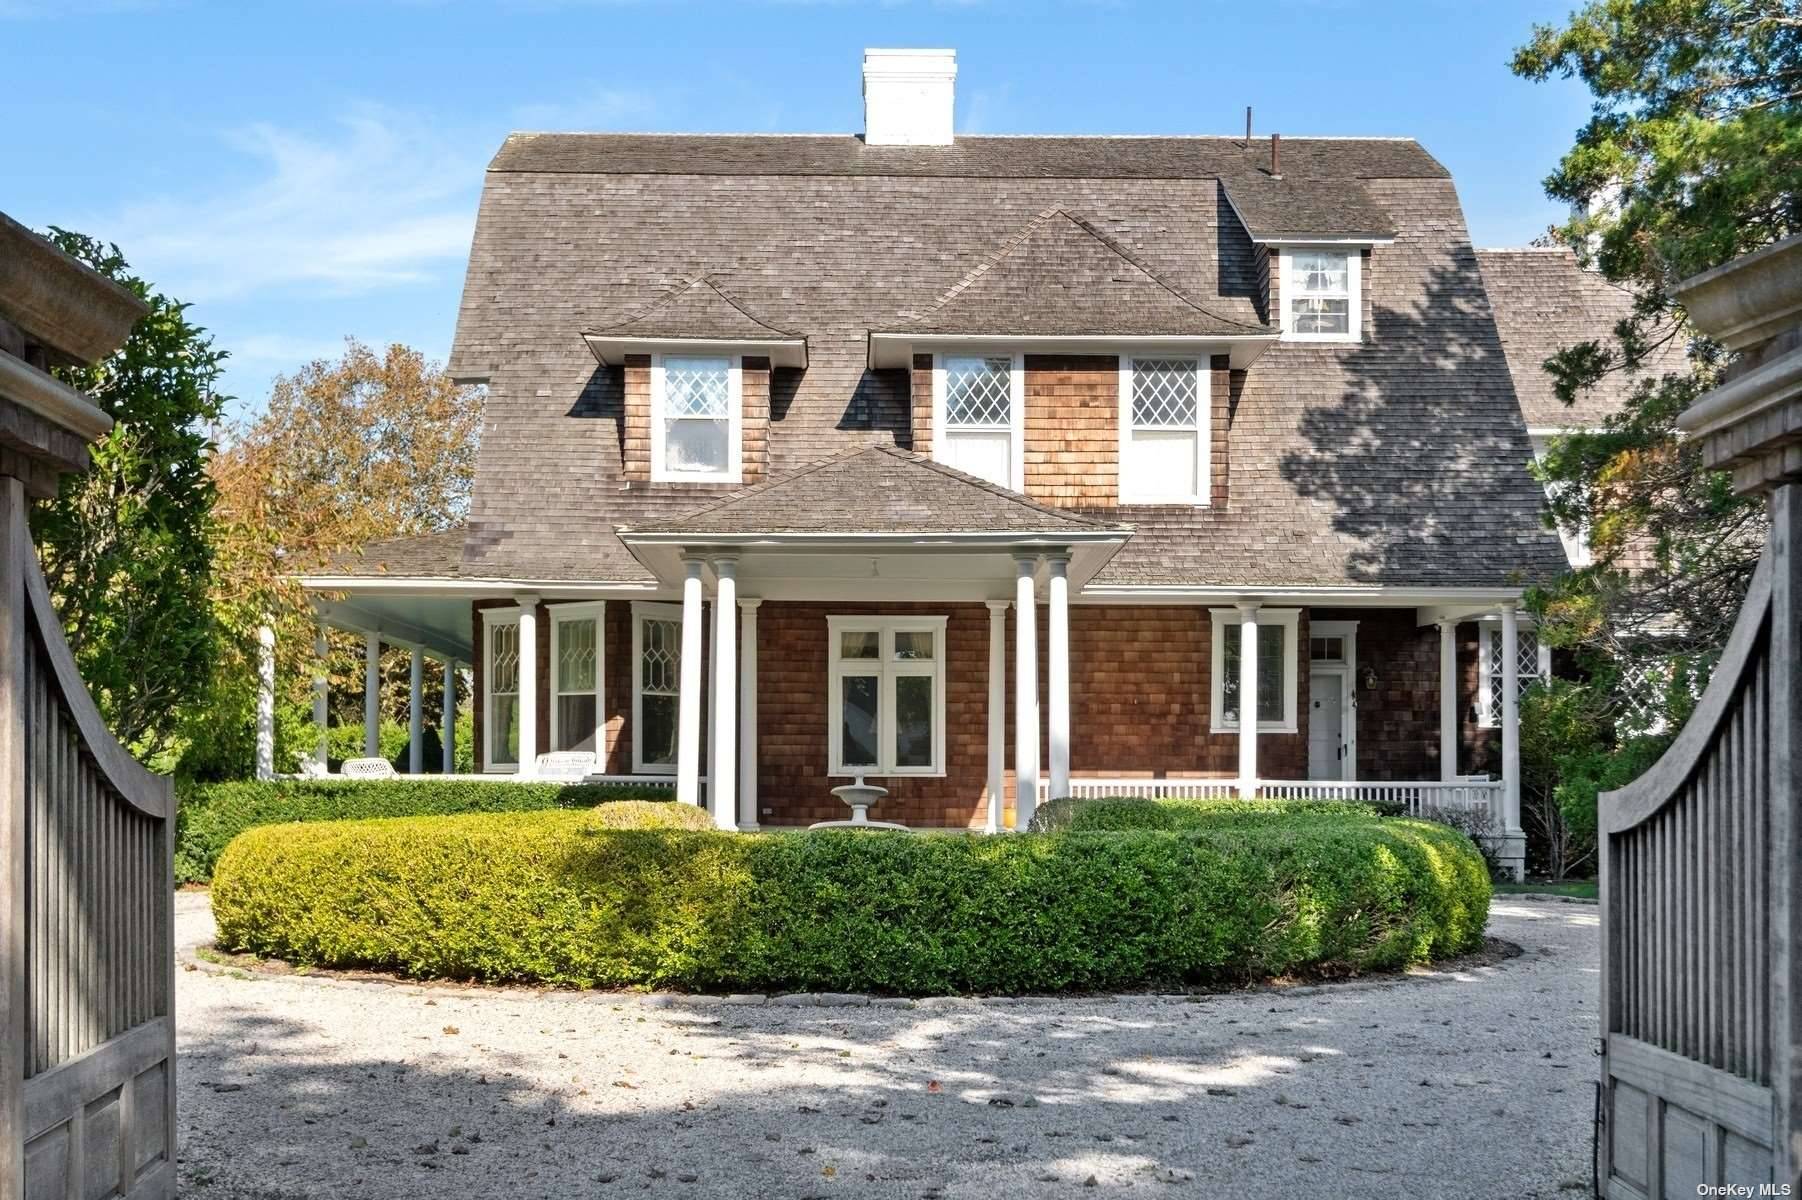 Traditional Shingle Style home in the heart of the Quogue Estate Section.